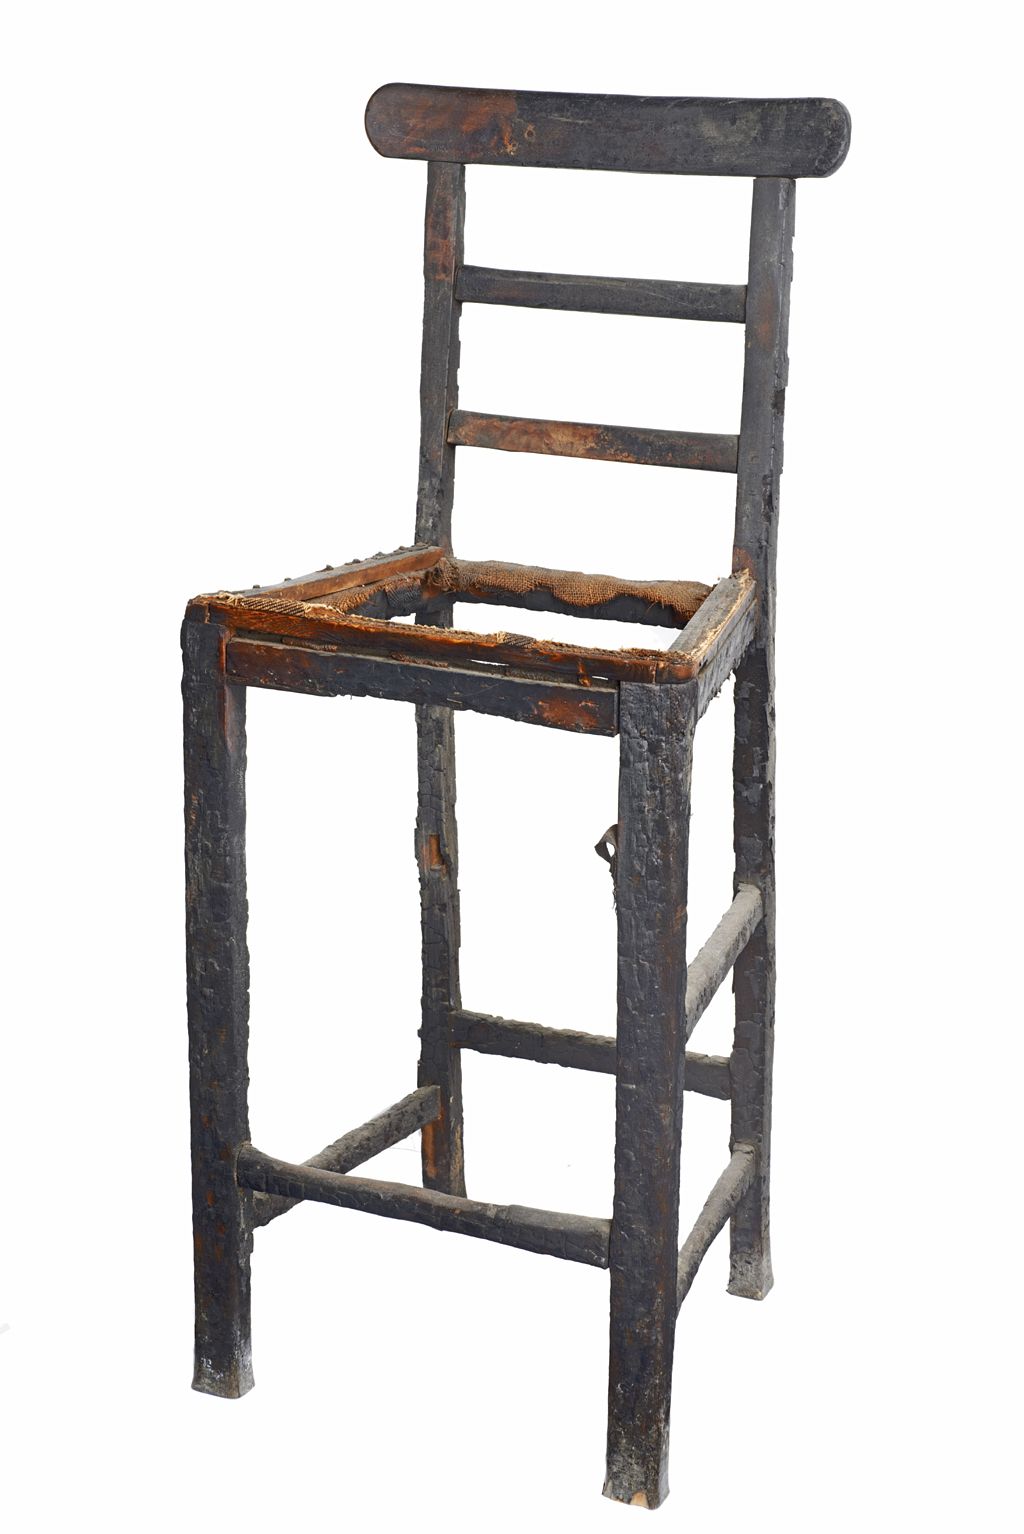 Chair used by Samuel Furnace to fake his own death, 1933